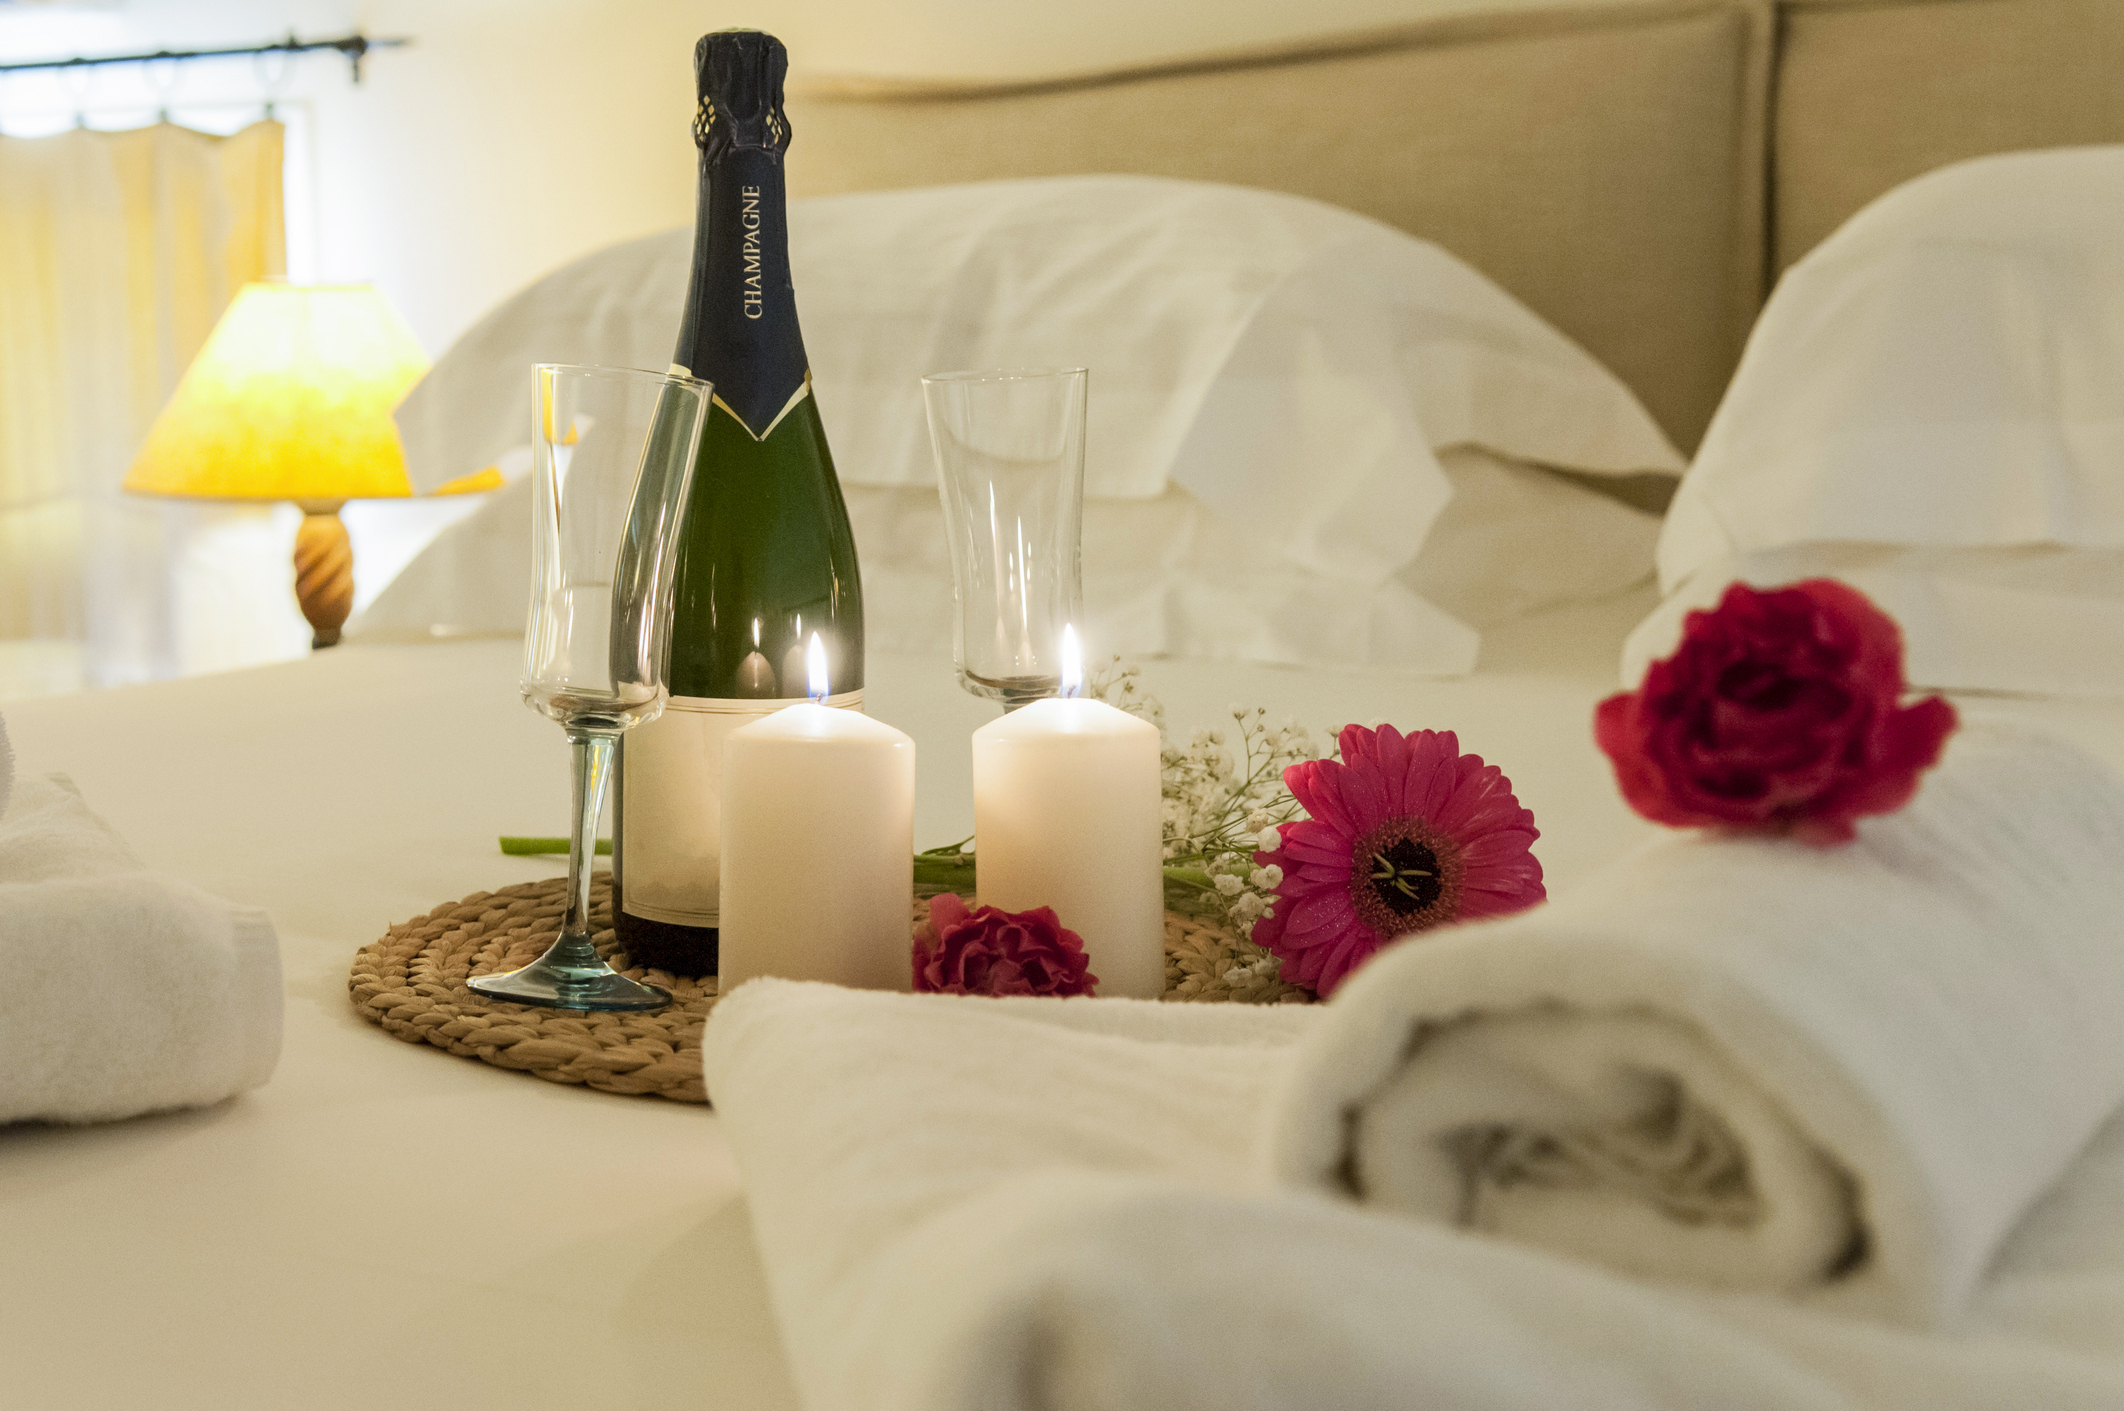 Japan’s Love Hotels: 10 Hotels To Suit Every Taste - Champagne bottle, candles, flowers on a bed in a hotel room